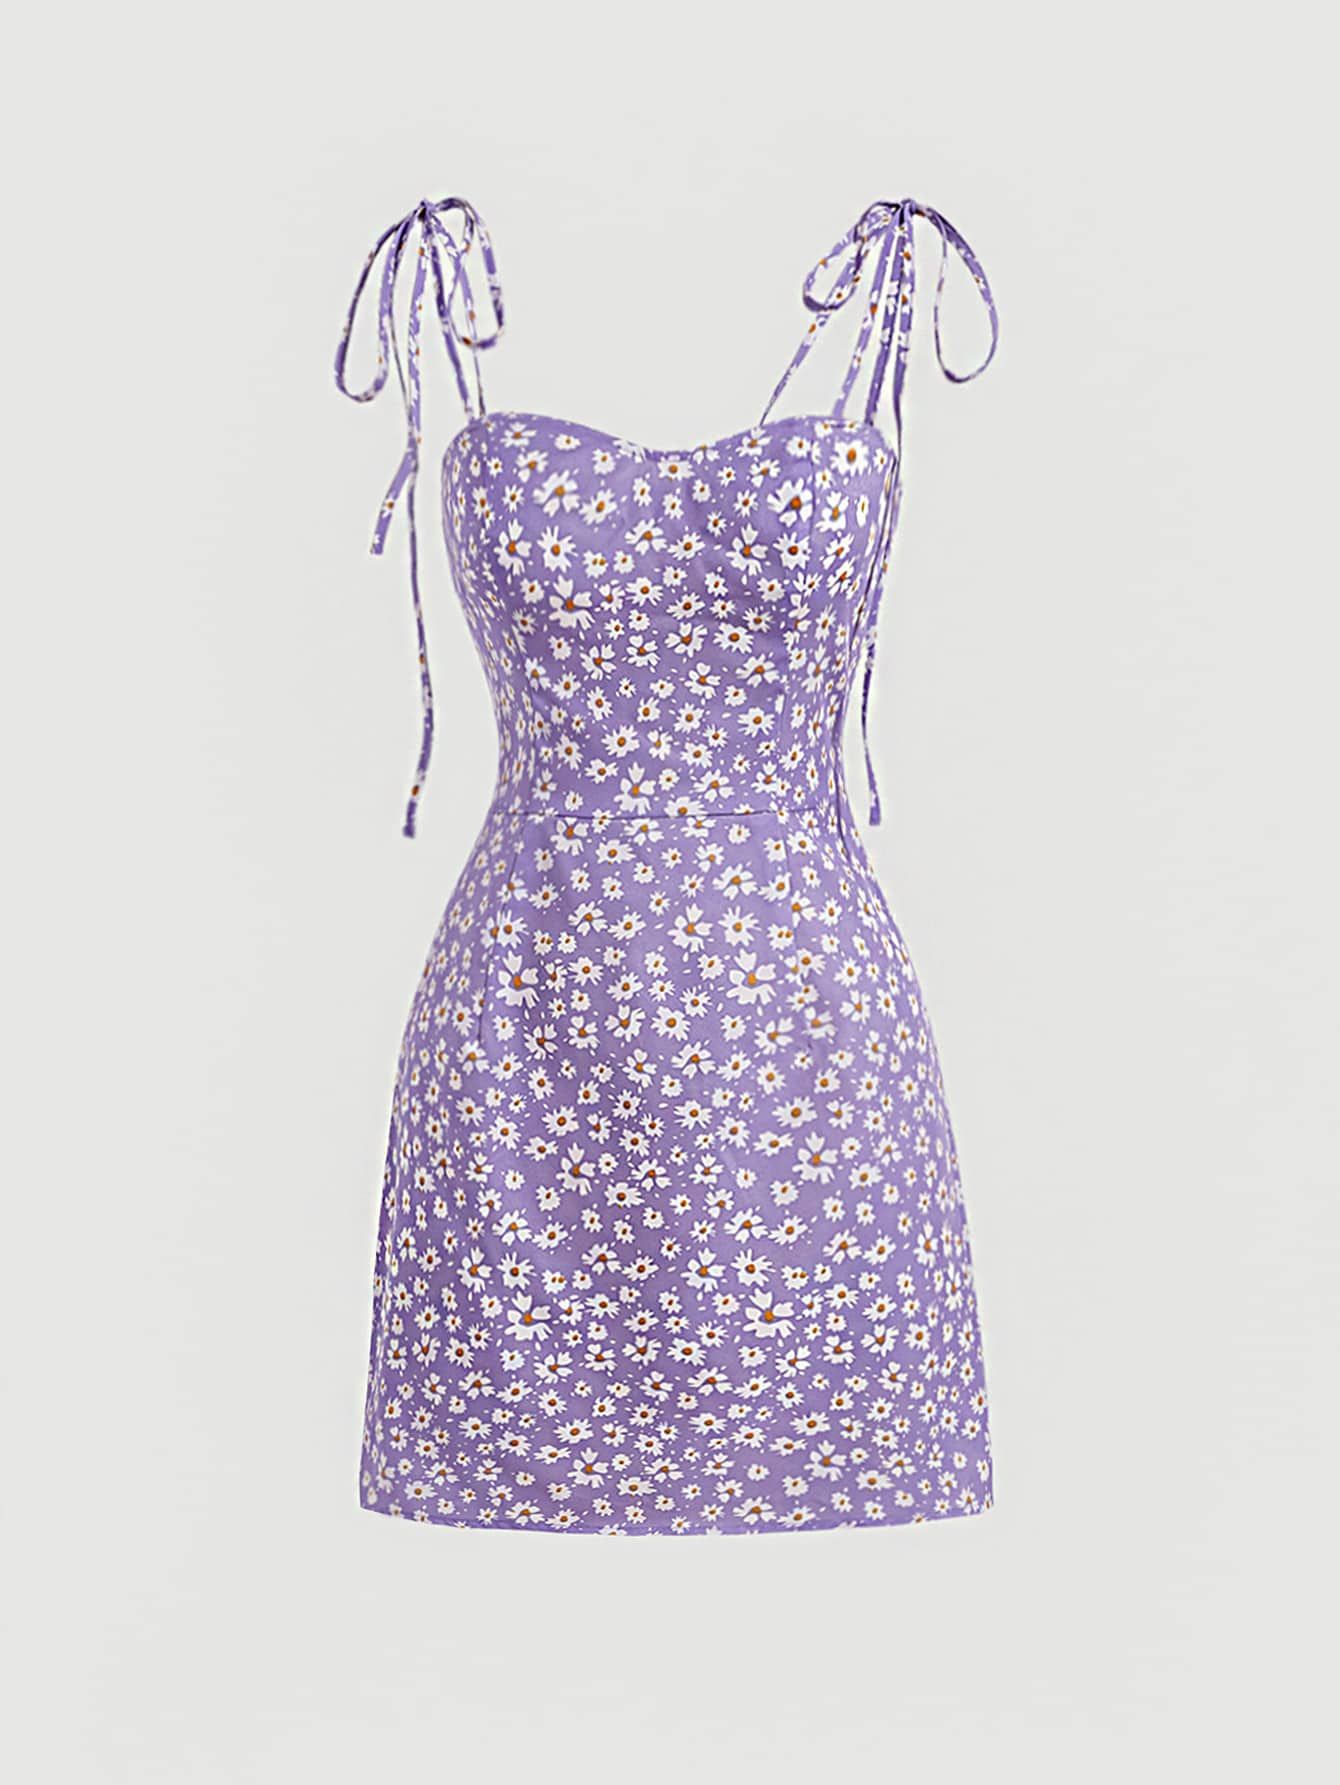 Purple Dress: Adding a Pop of Color to Your Wardrobe